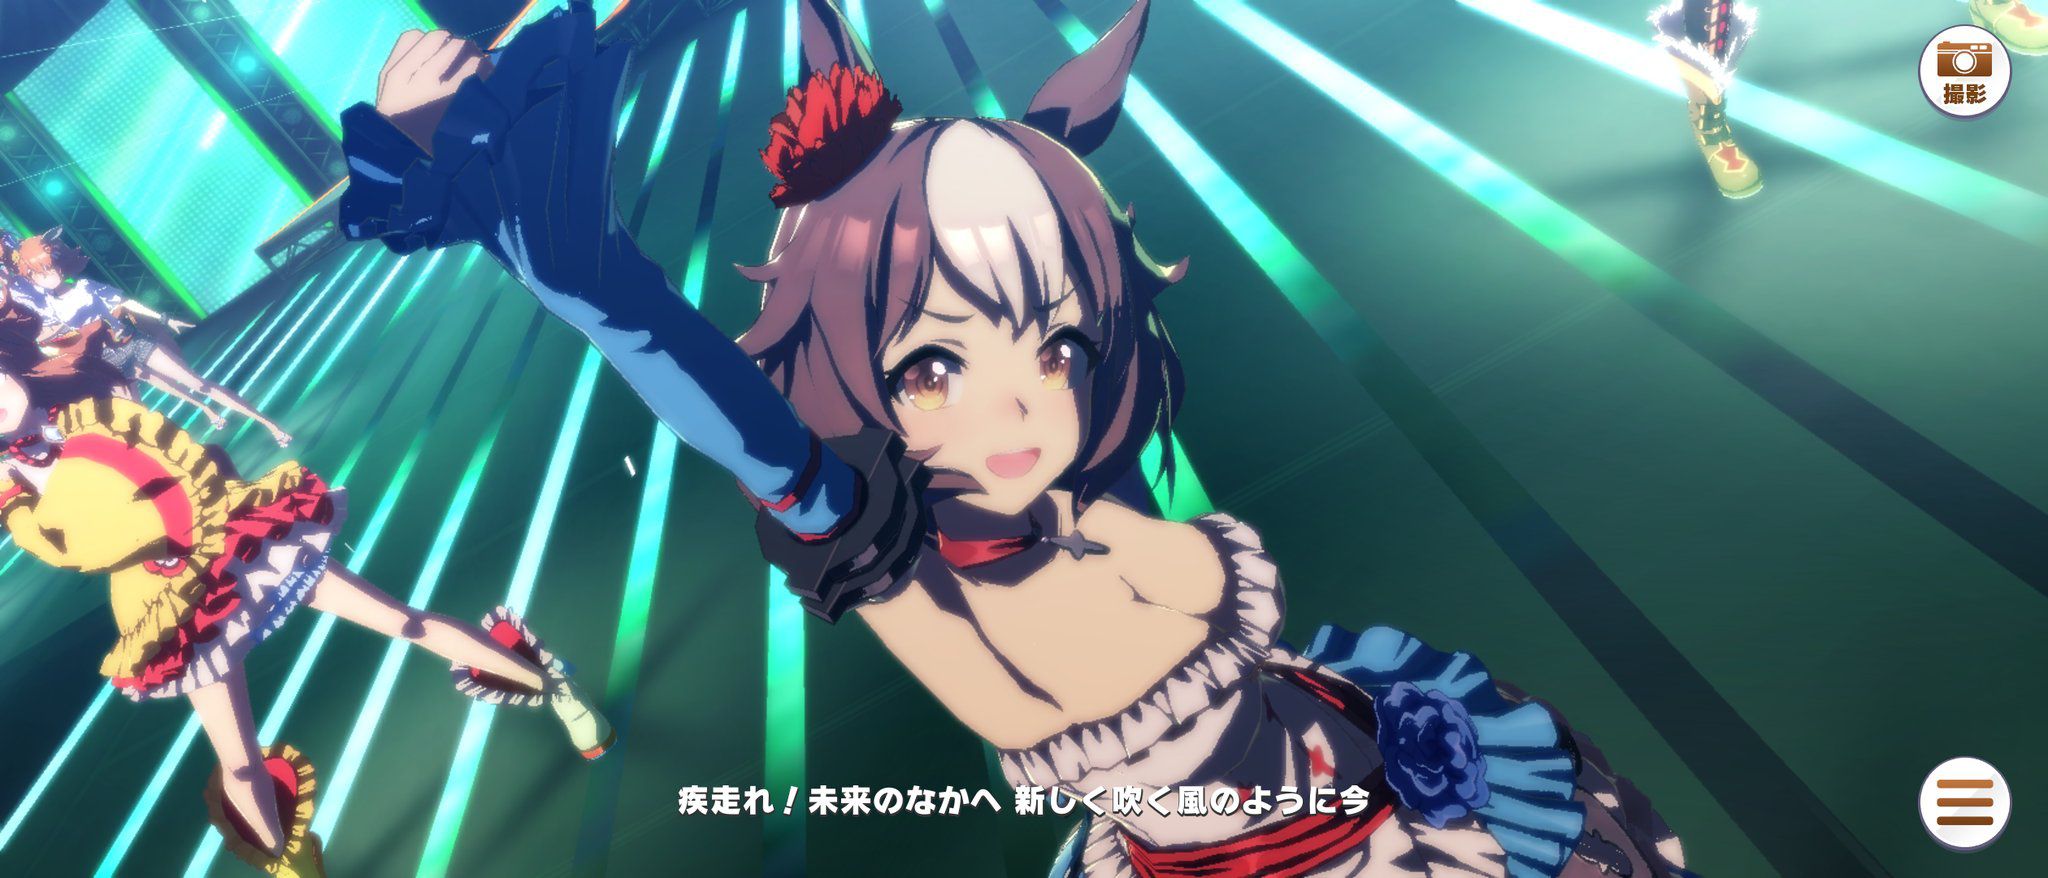 【Image】Uma Musume will implement a new character with the most erotic costume ever 20